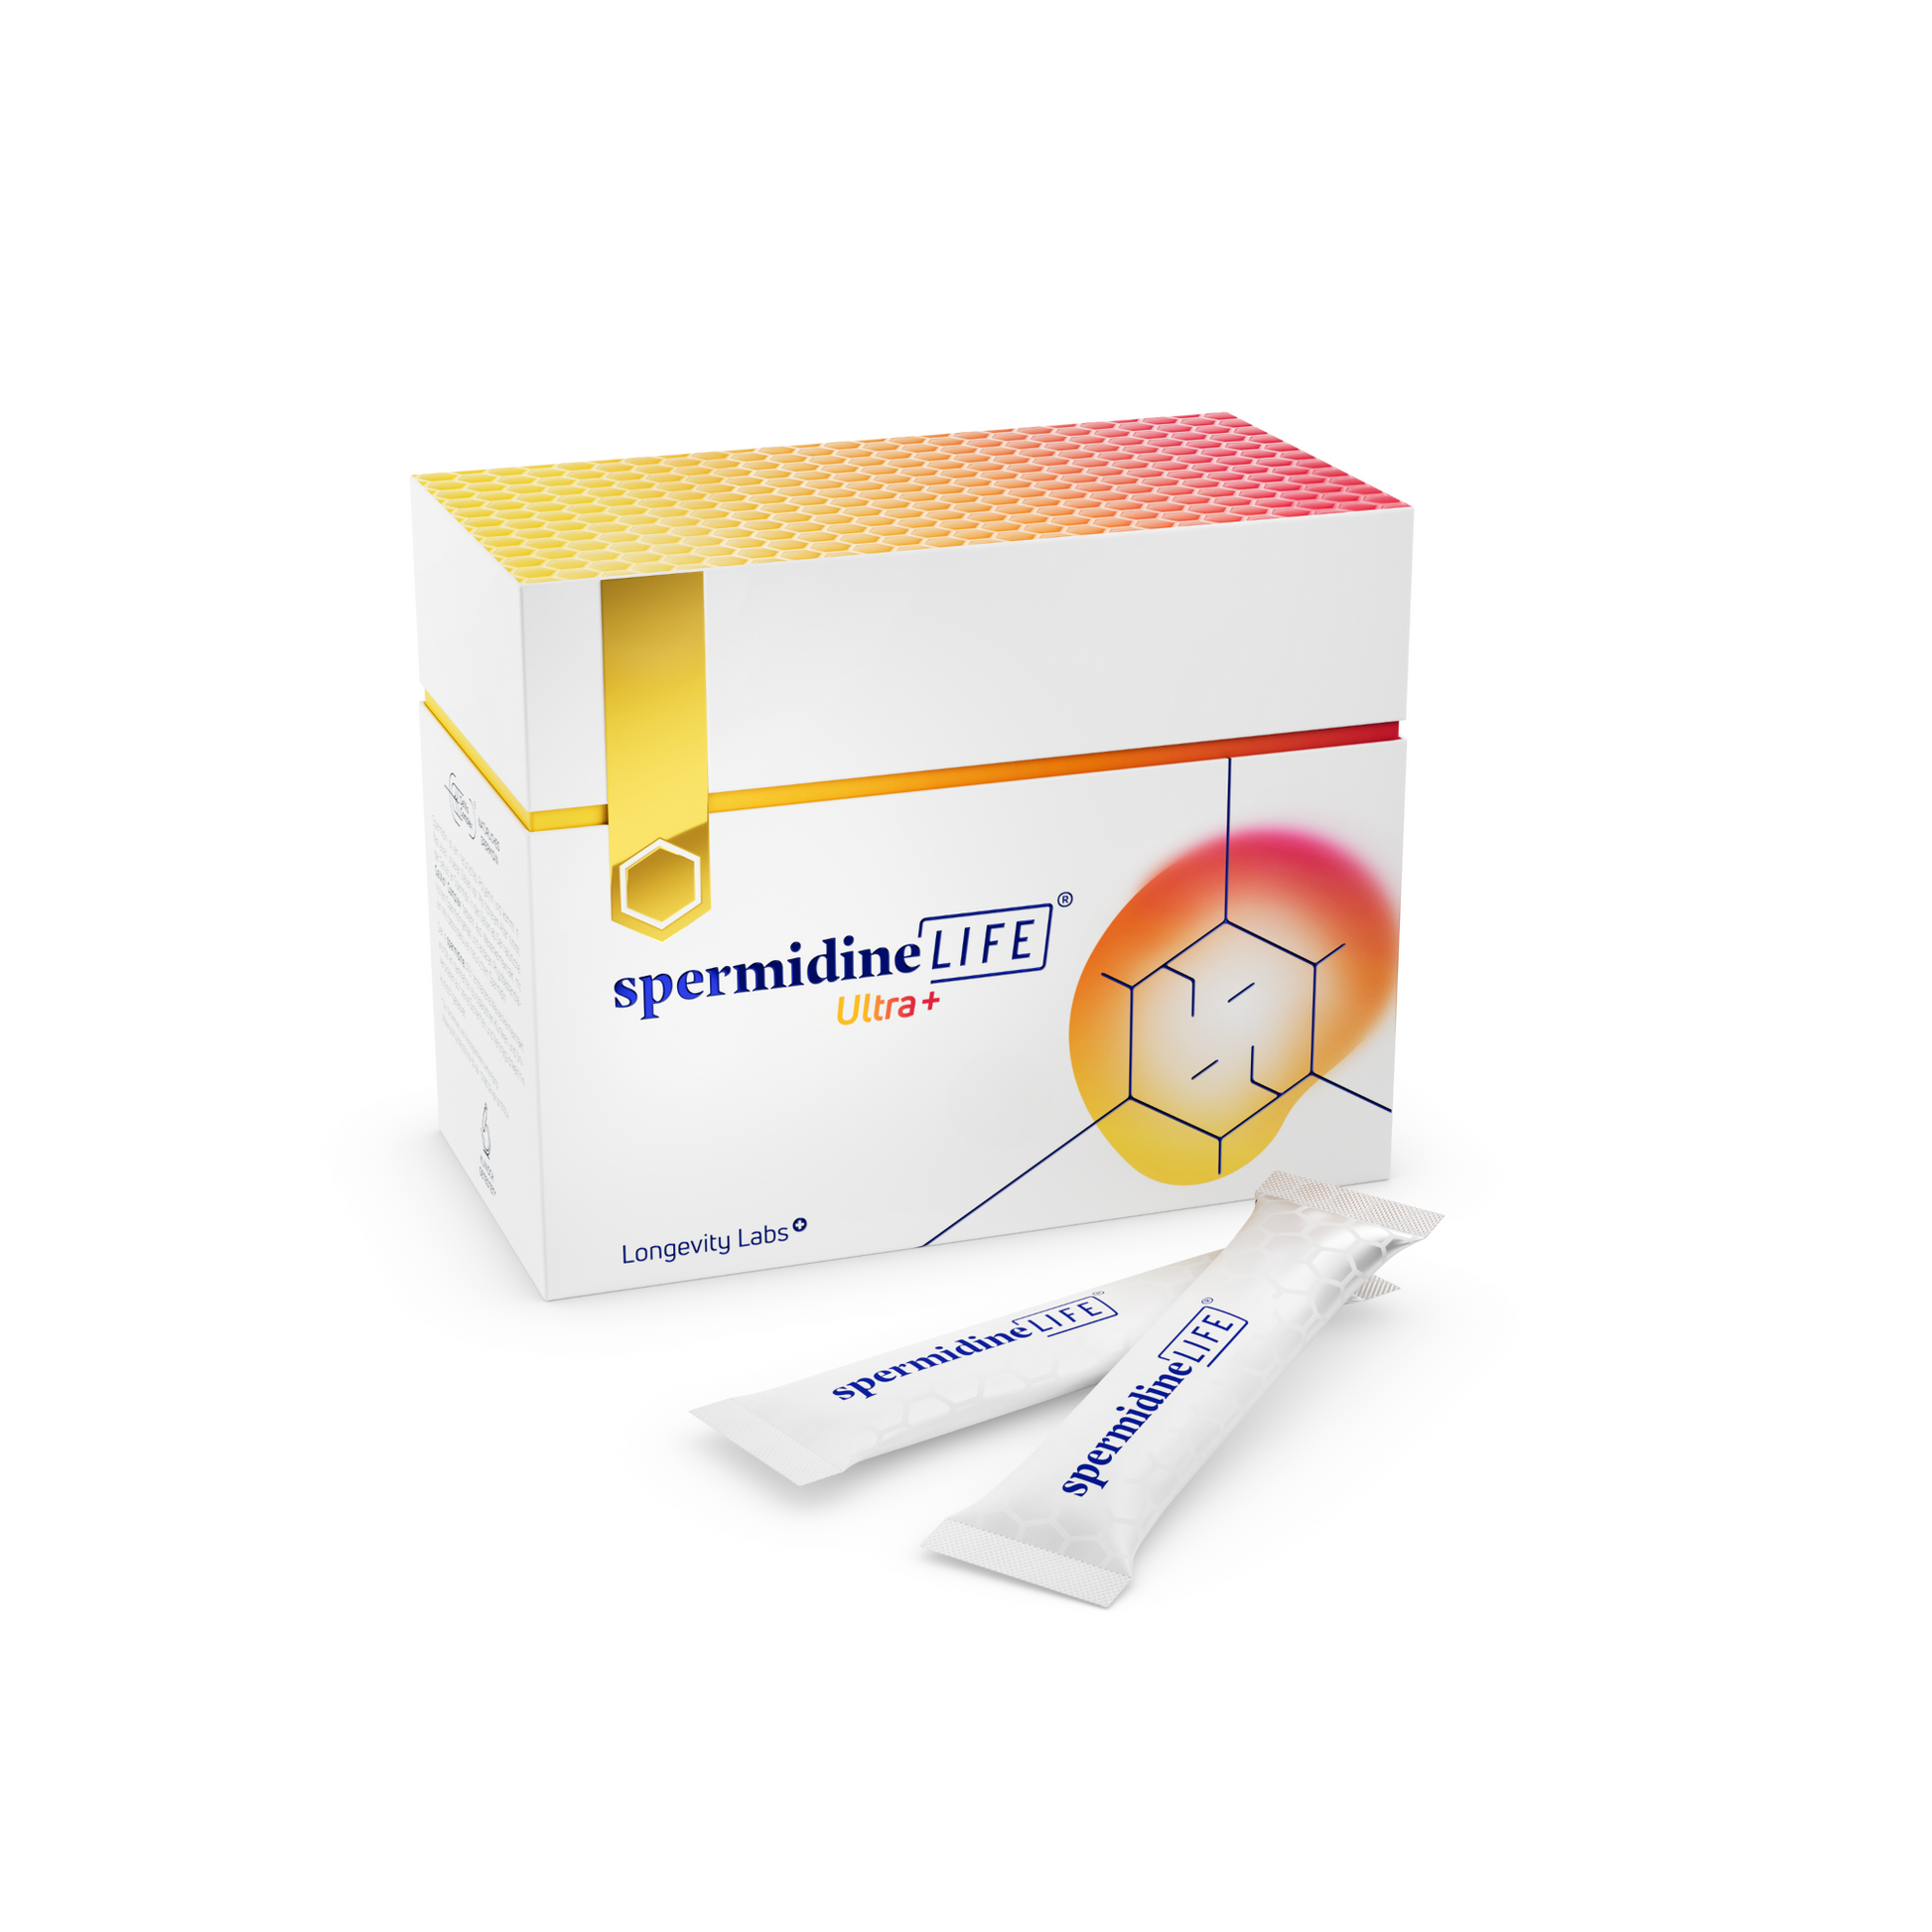 spermidineLIFE Ultra+ box and 2 packets